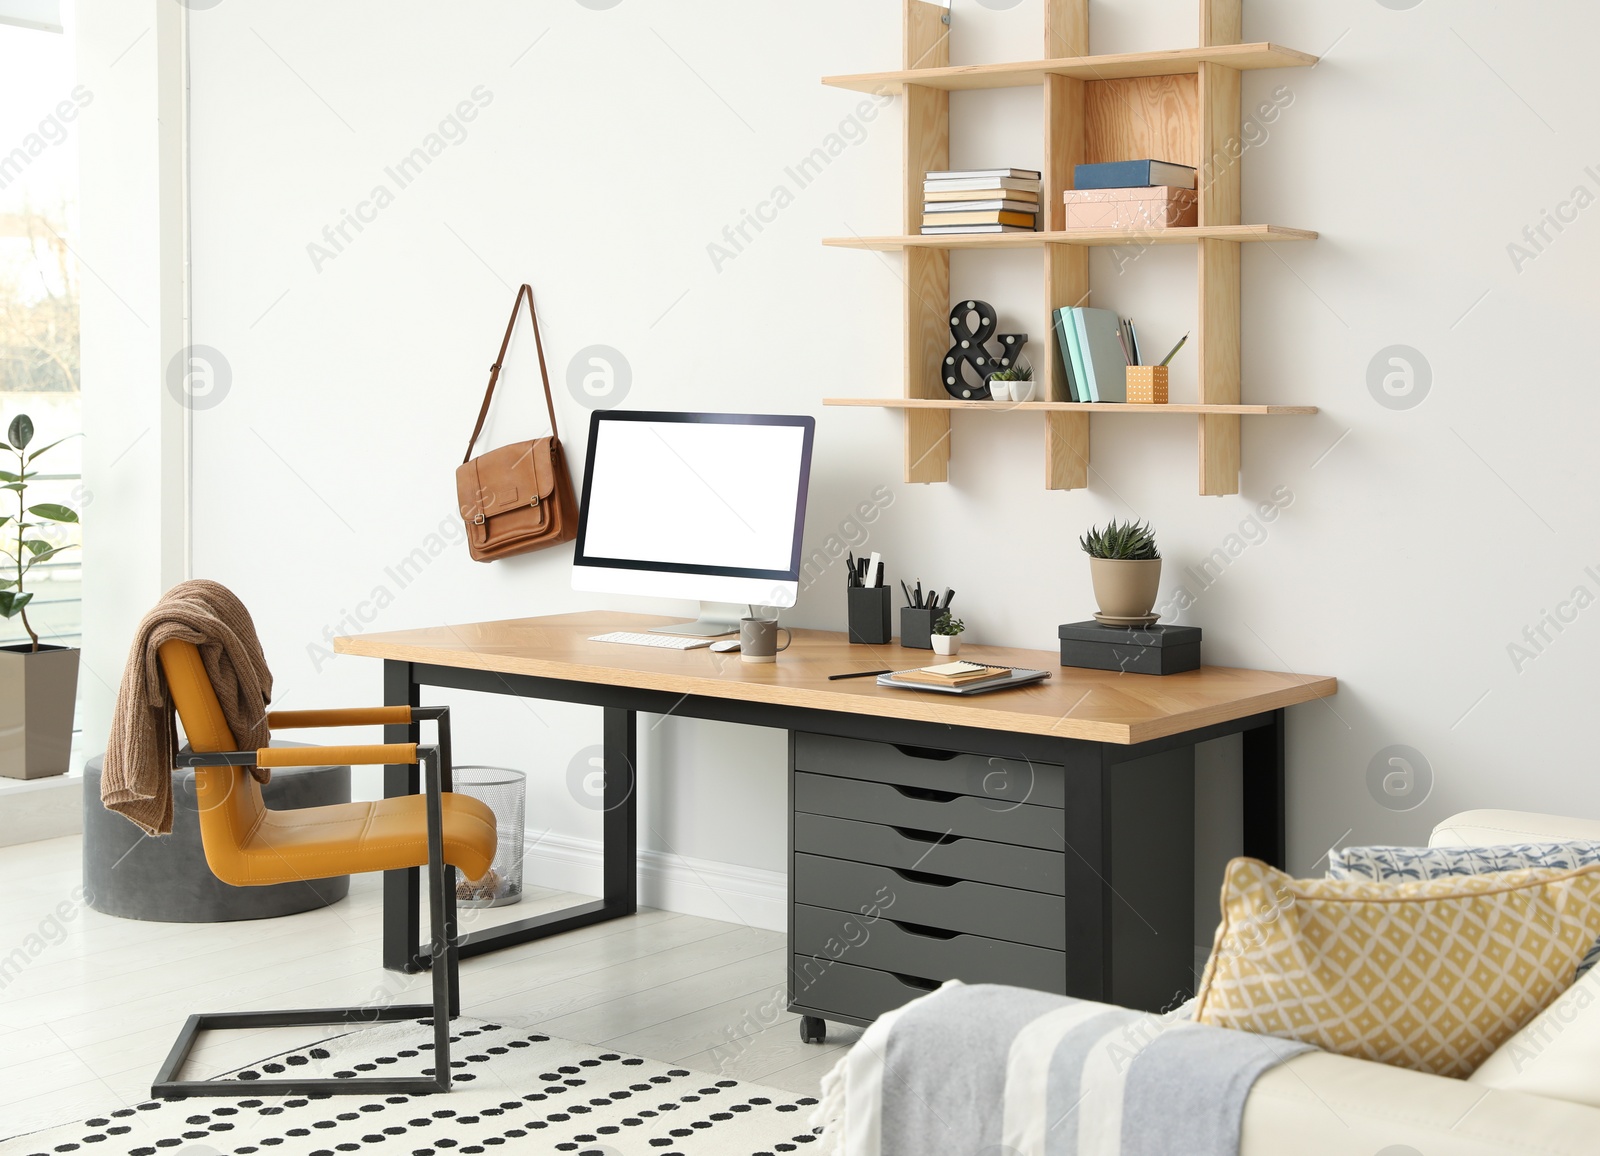 Photo of Stylish room interior with modern comfortable workplace